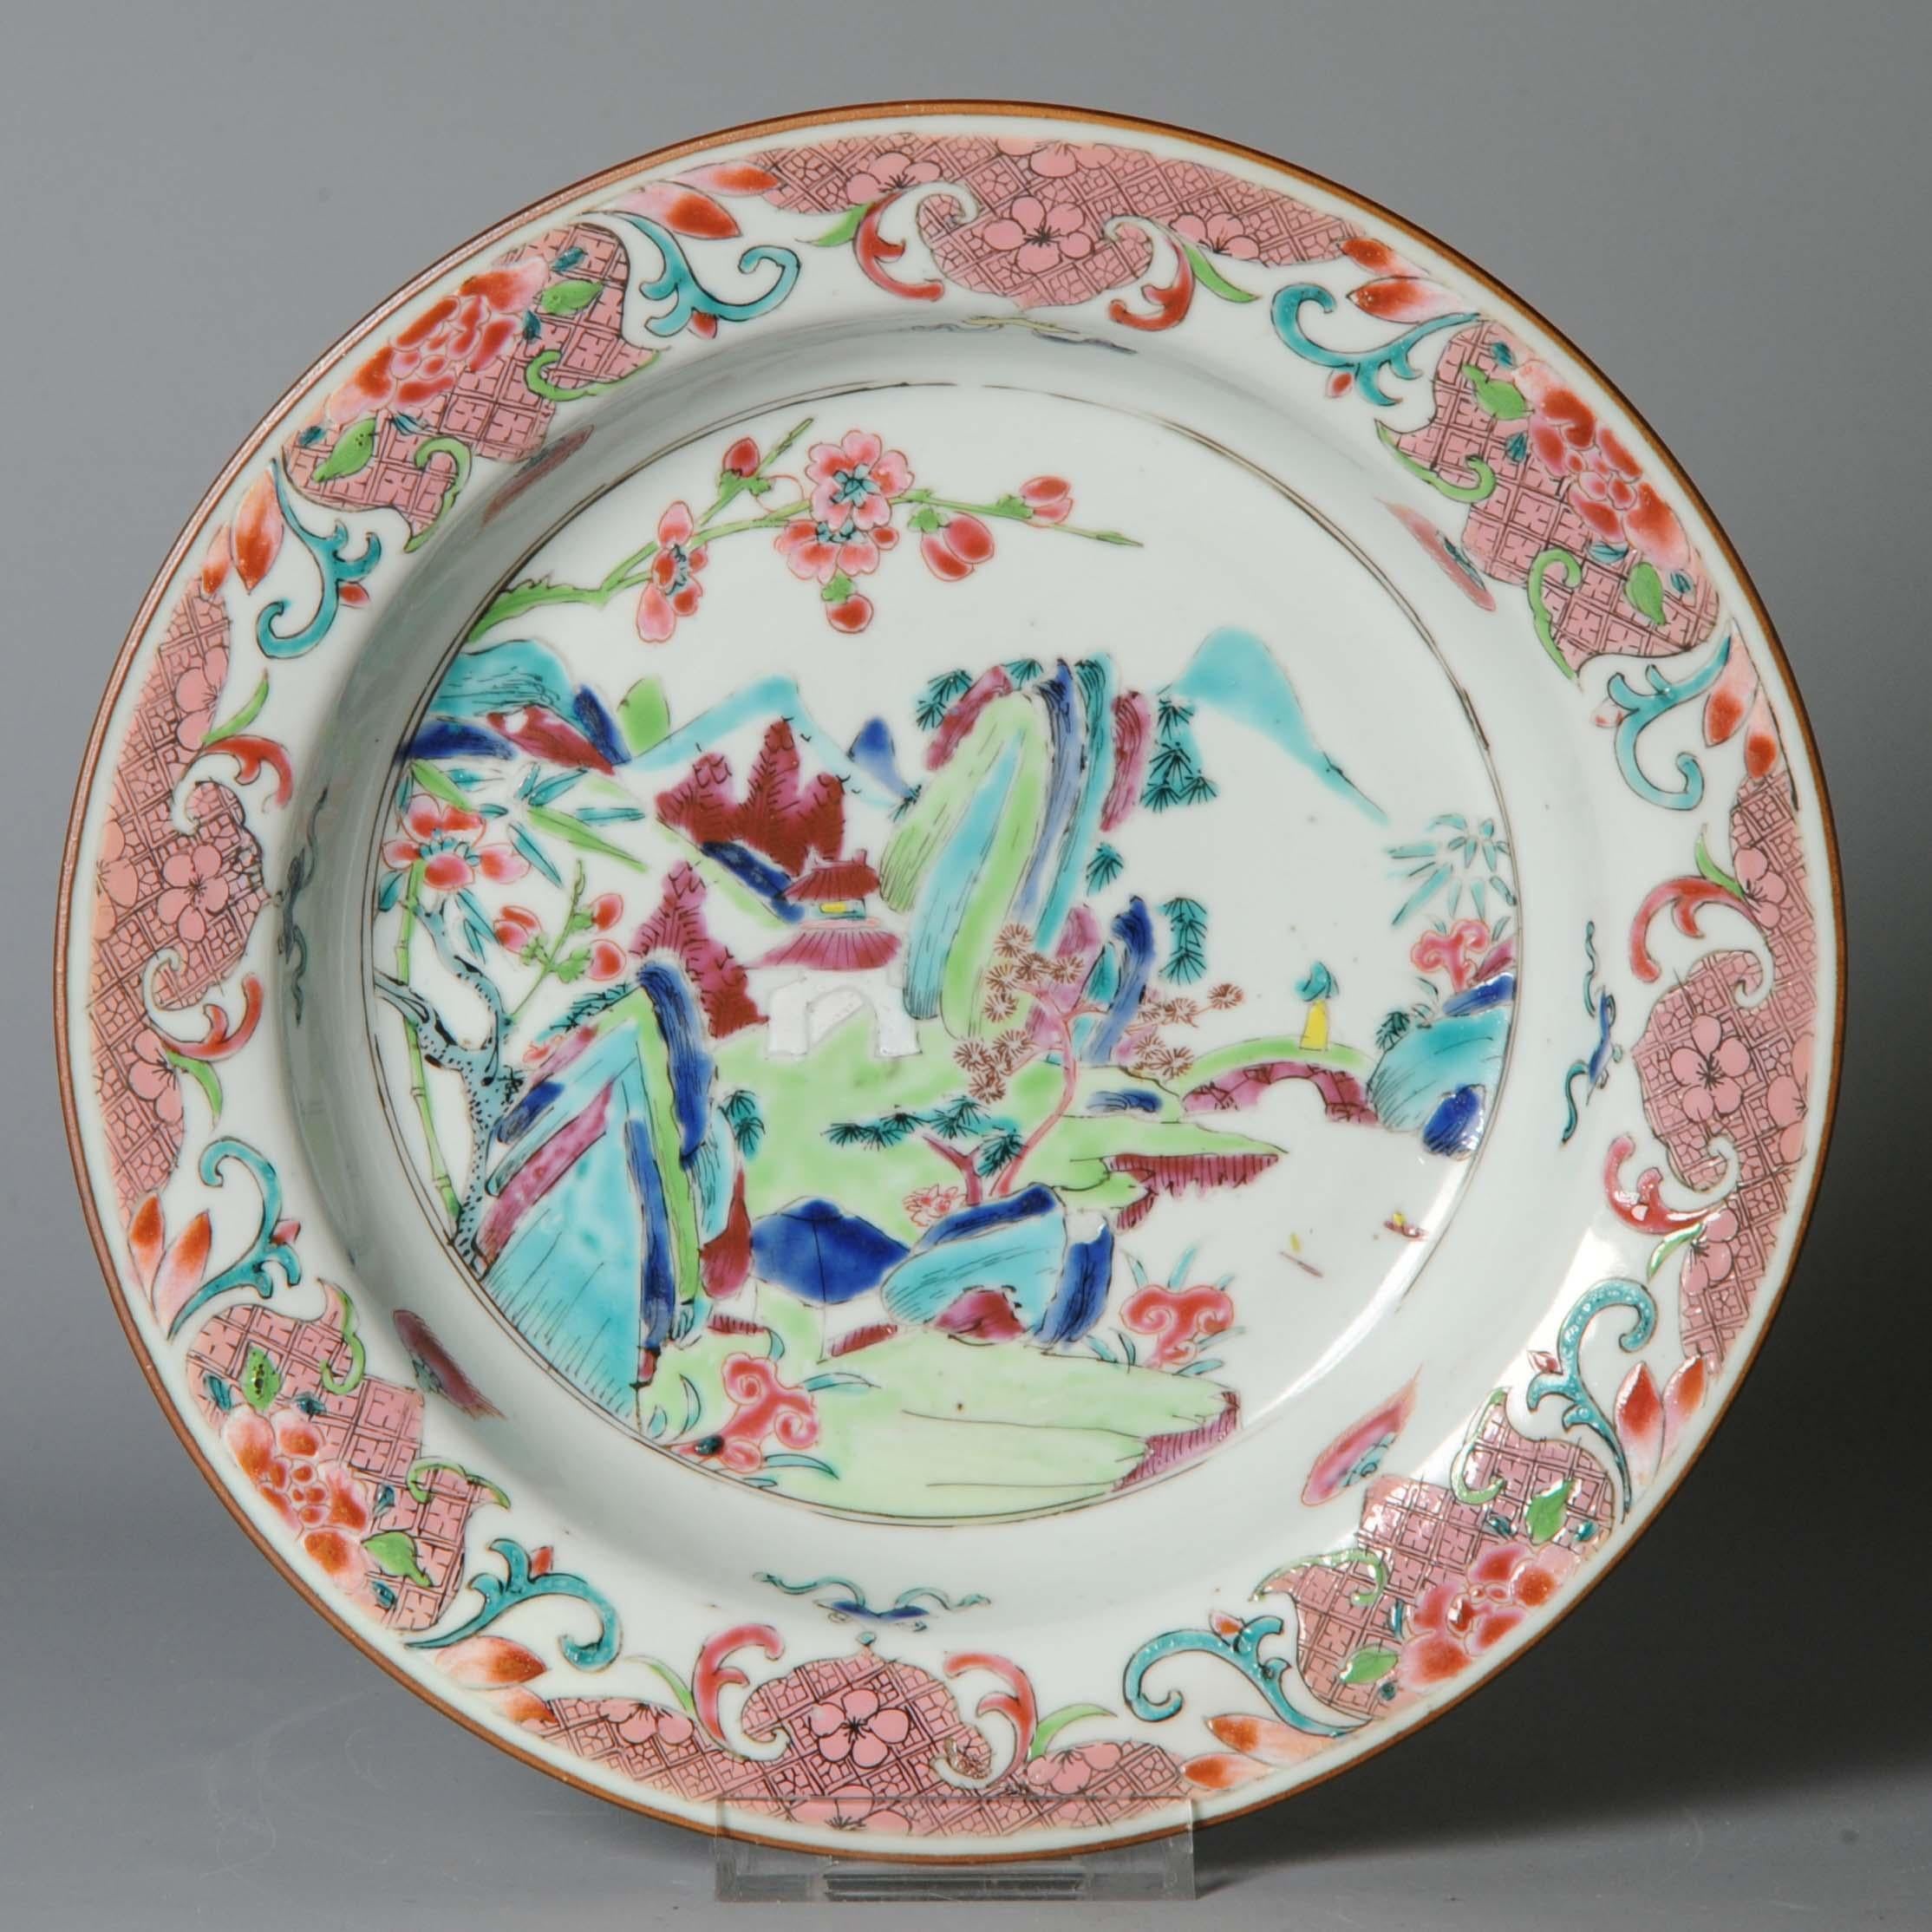 Description
Sharing with you this rare dish from the 18th century, Yongzheng or early Qianlong period.

Period
18th century Qing (1661 - 1912).